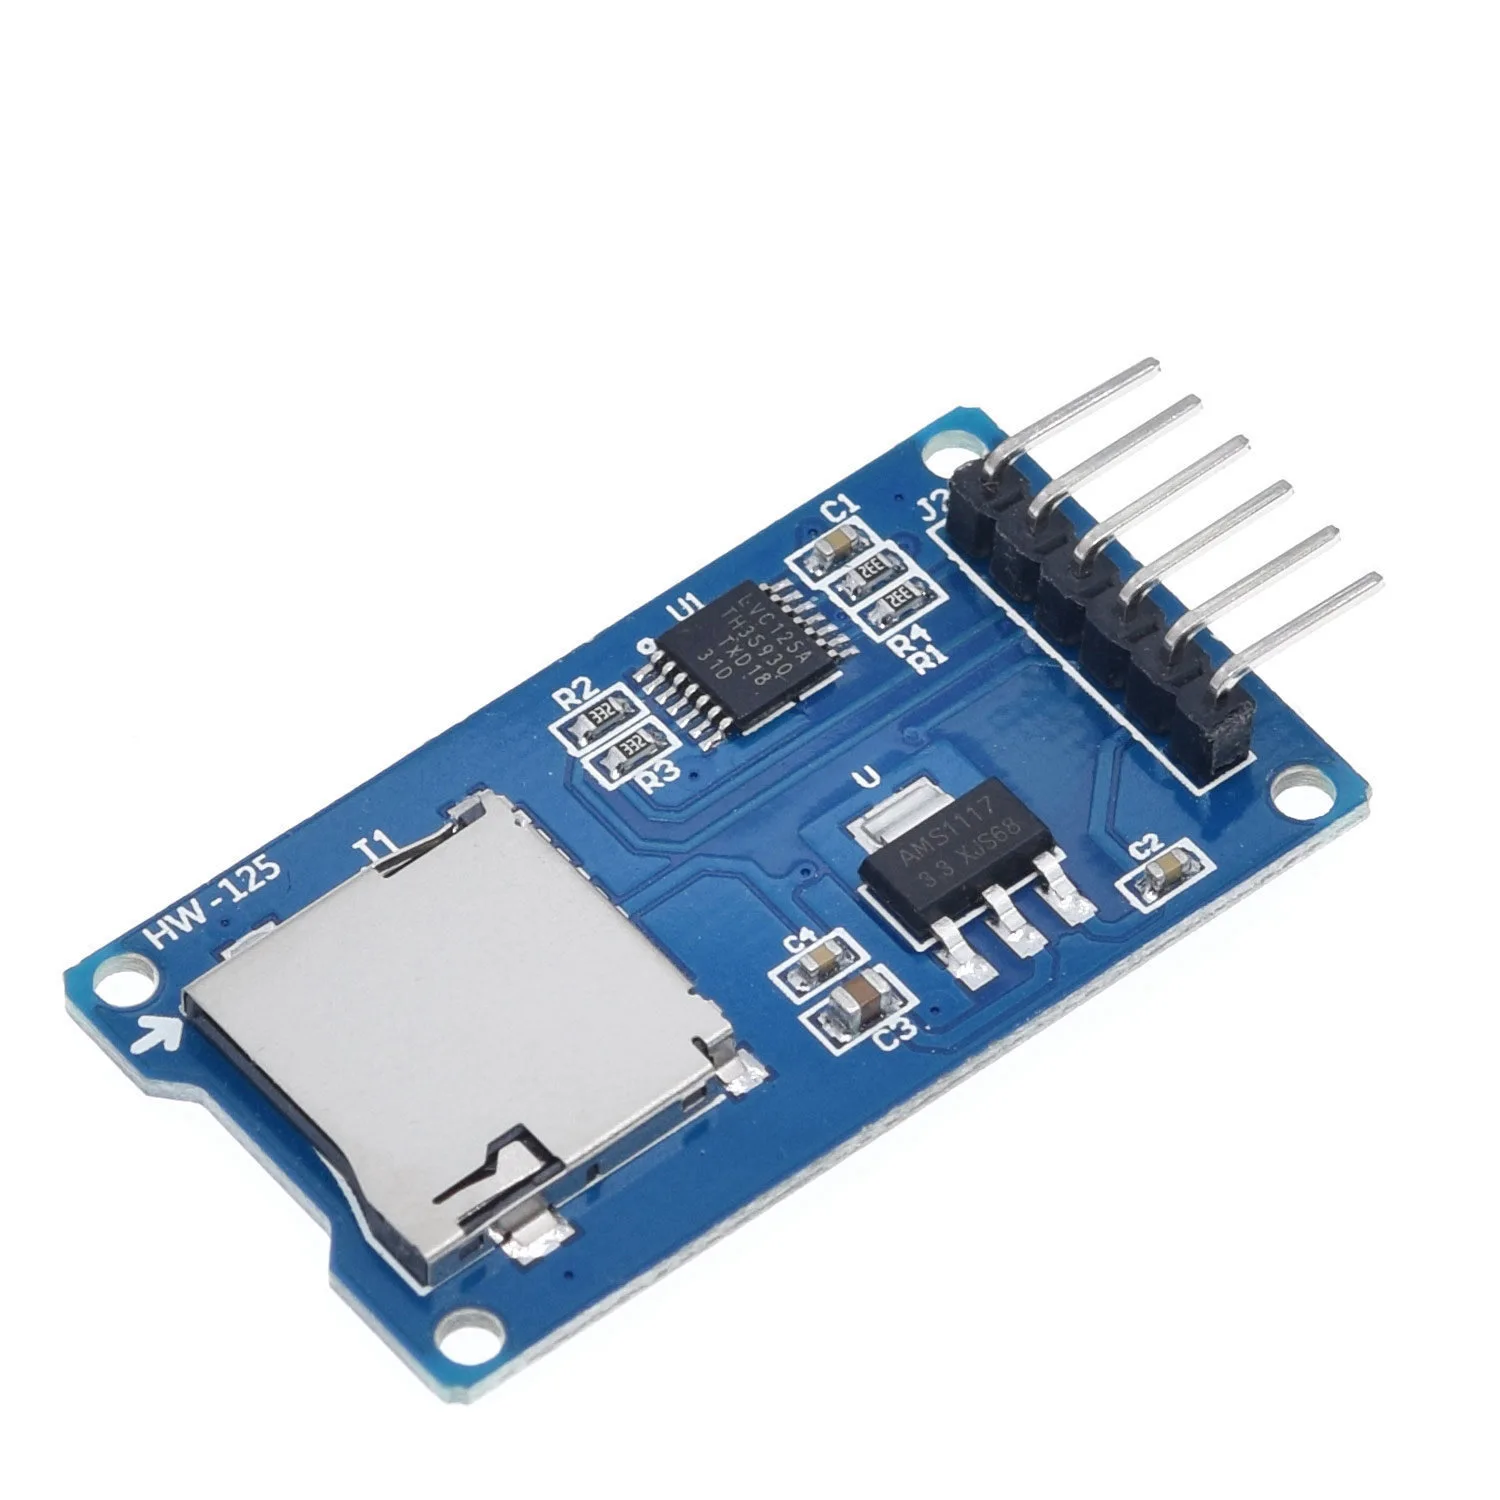 

Micro SD Card & SDHC(high-speed card) Mini TF Card Reader Module Adapter SPI Interfaces with Level Converter Chip for Arduino